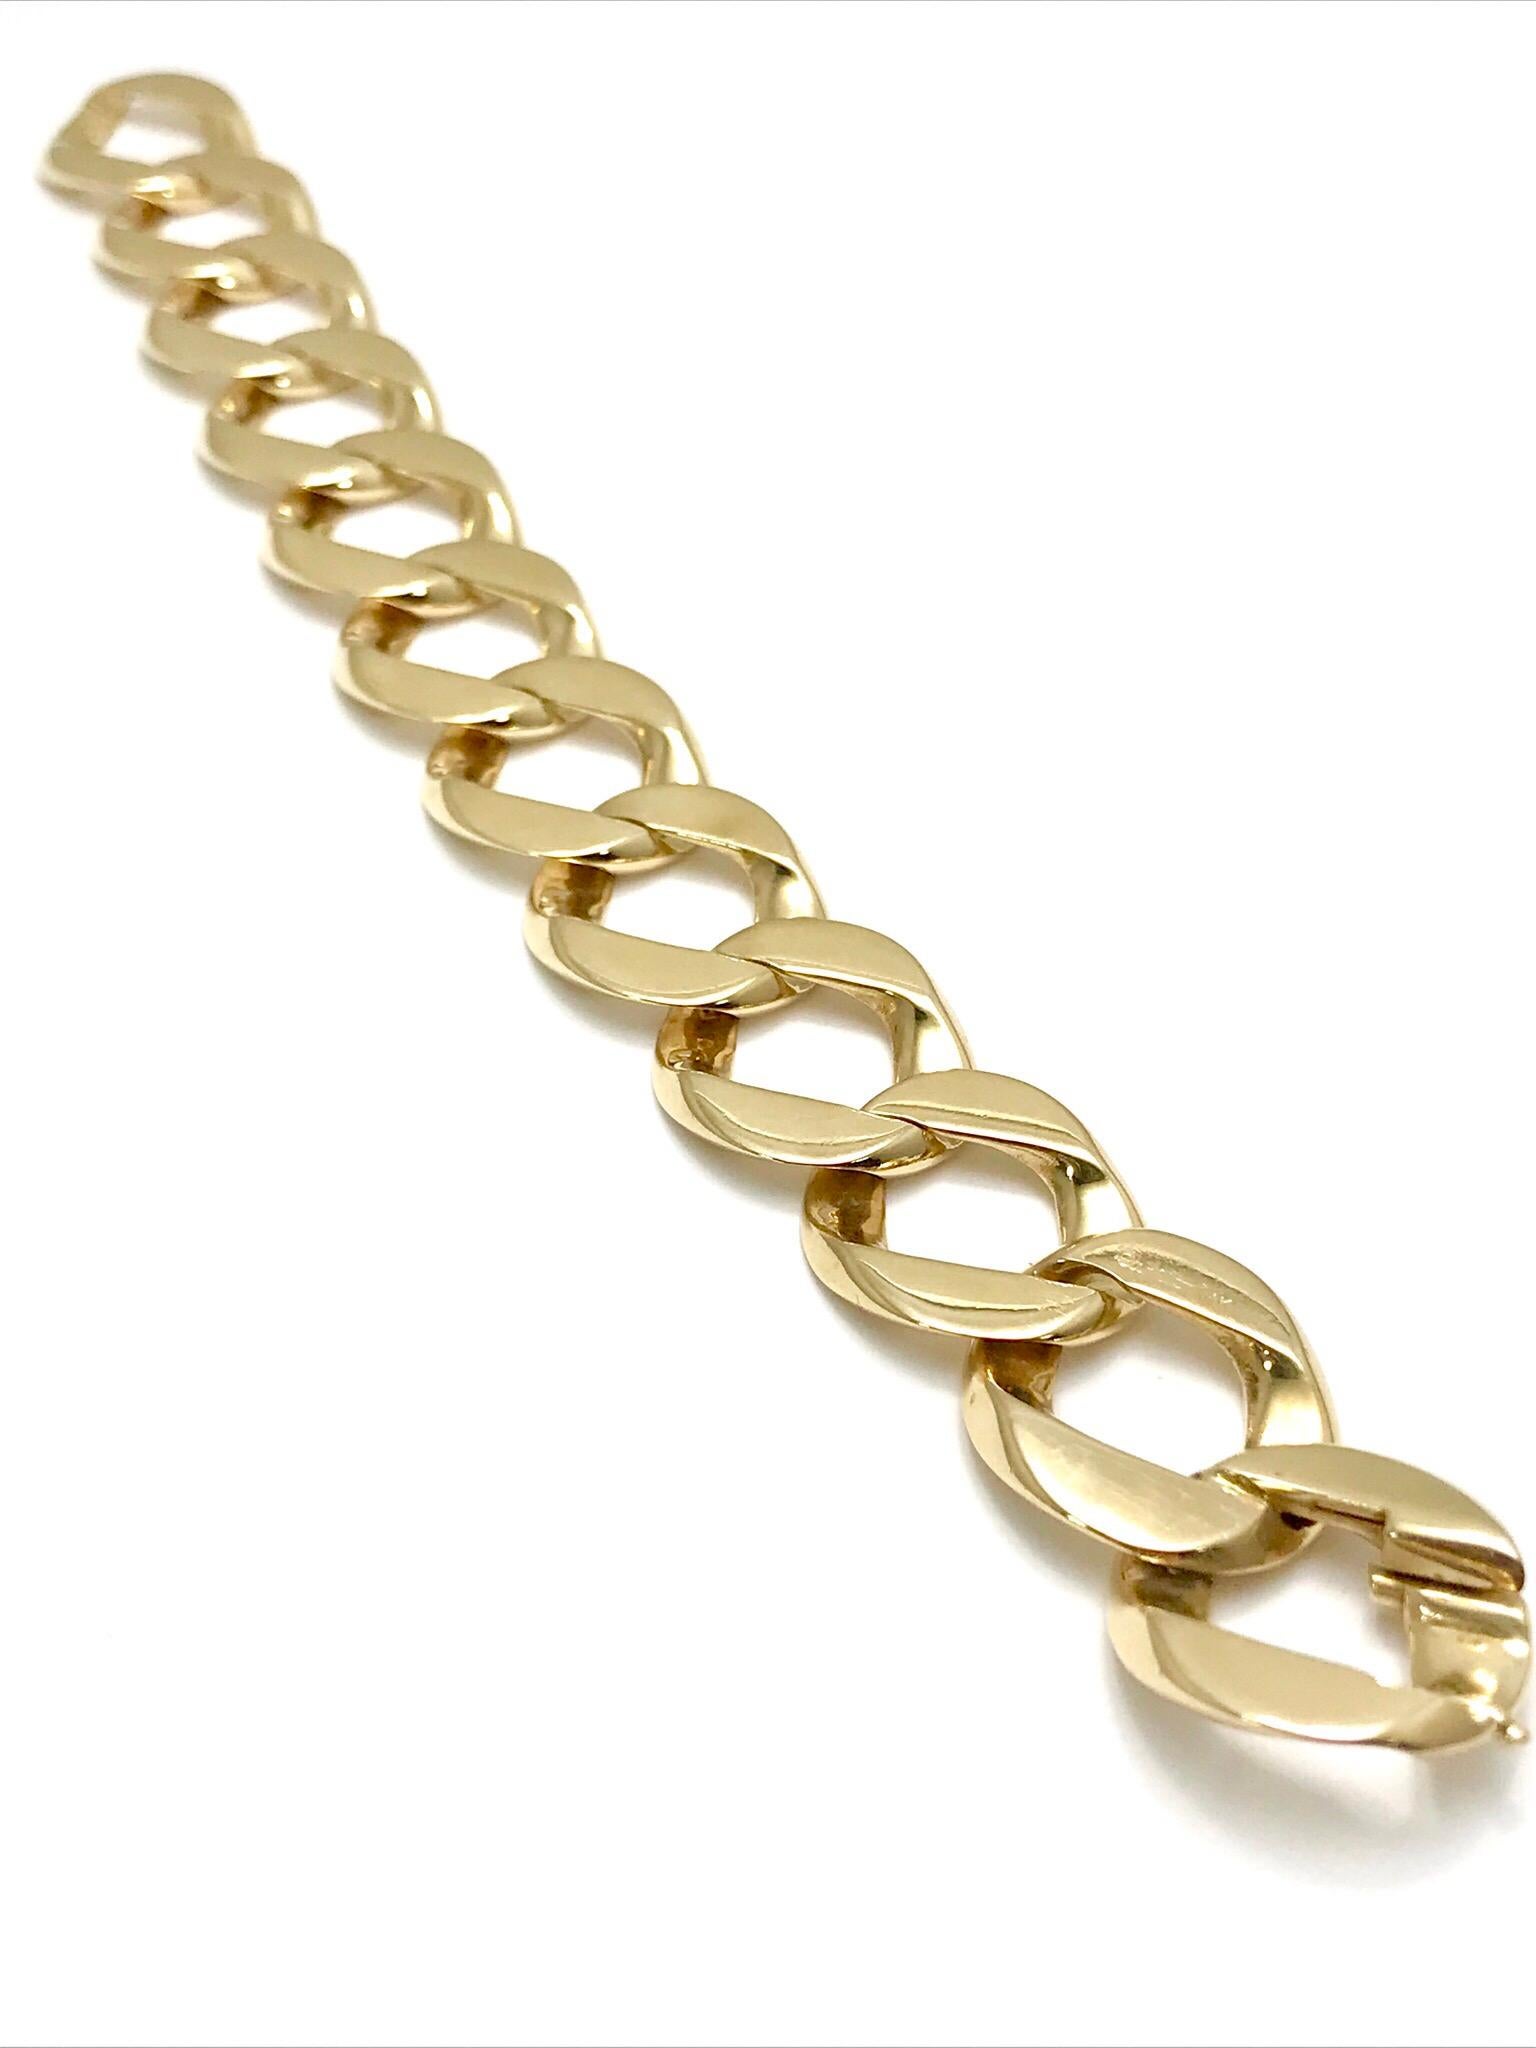 A fabulous piece for anyone to wear!  This 1960's Cartier yellow gold bracelet is ideal for versatility.  It is a curb link style made in 14 karat yellow gold with a polished finish.  It measures 8.00 inches in length, and each link is 19.50mm wide.